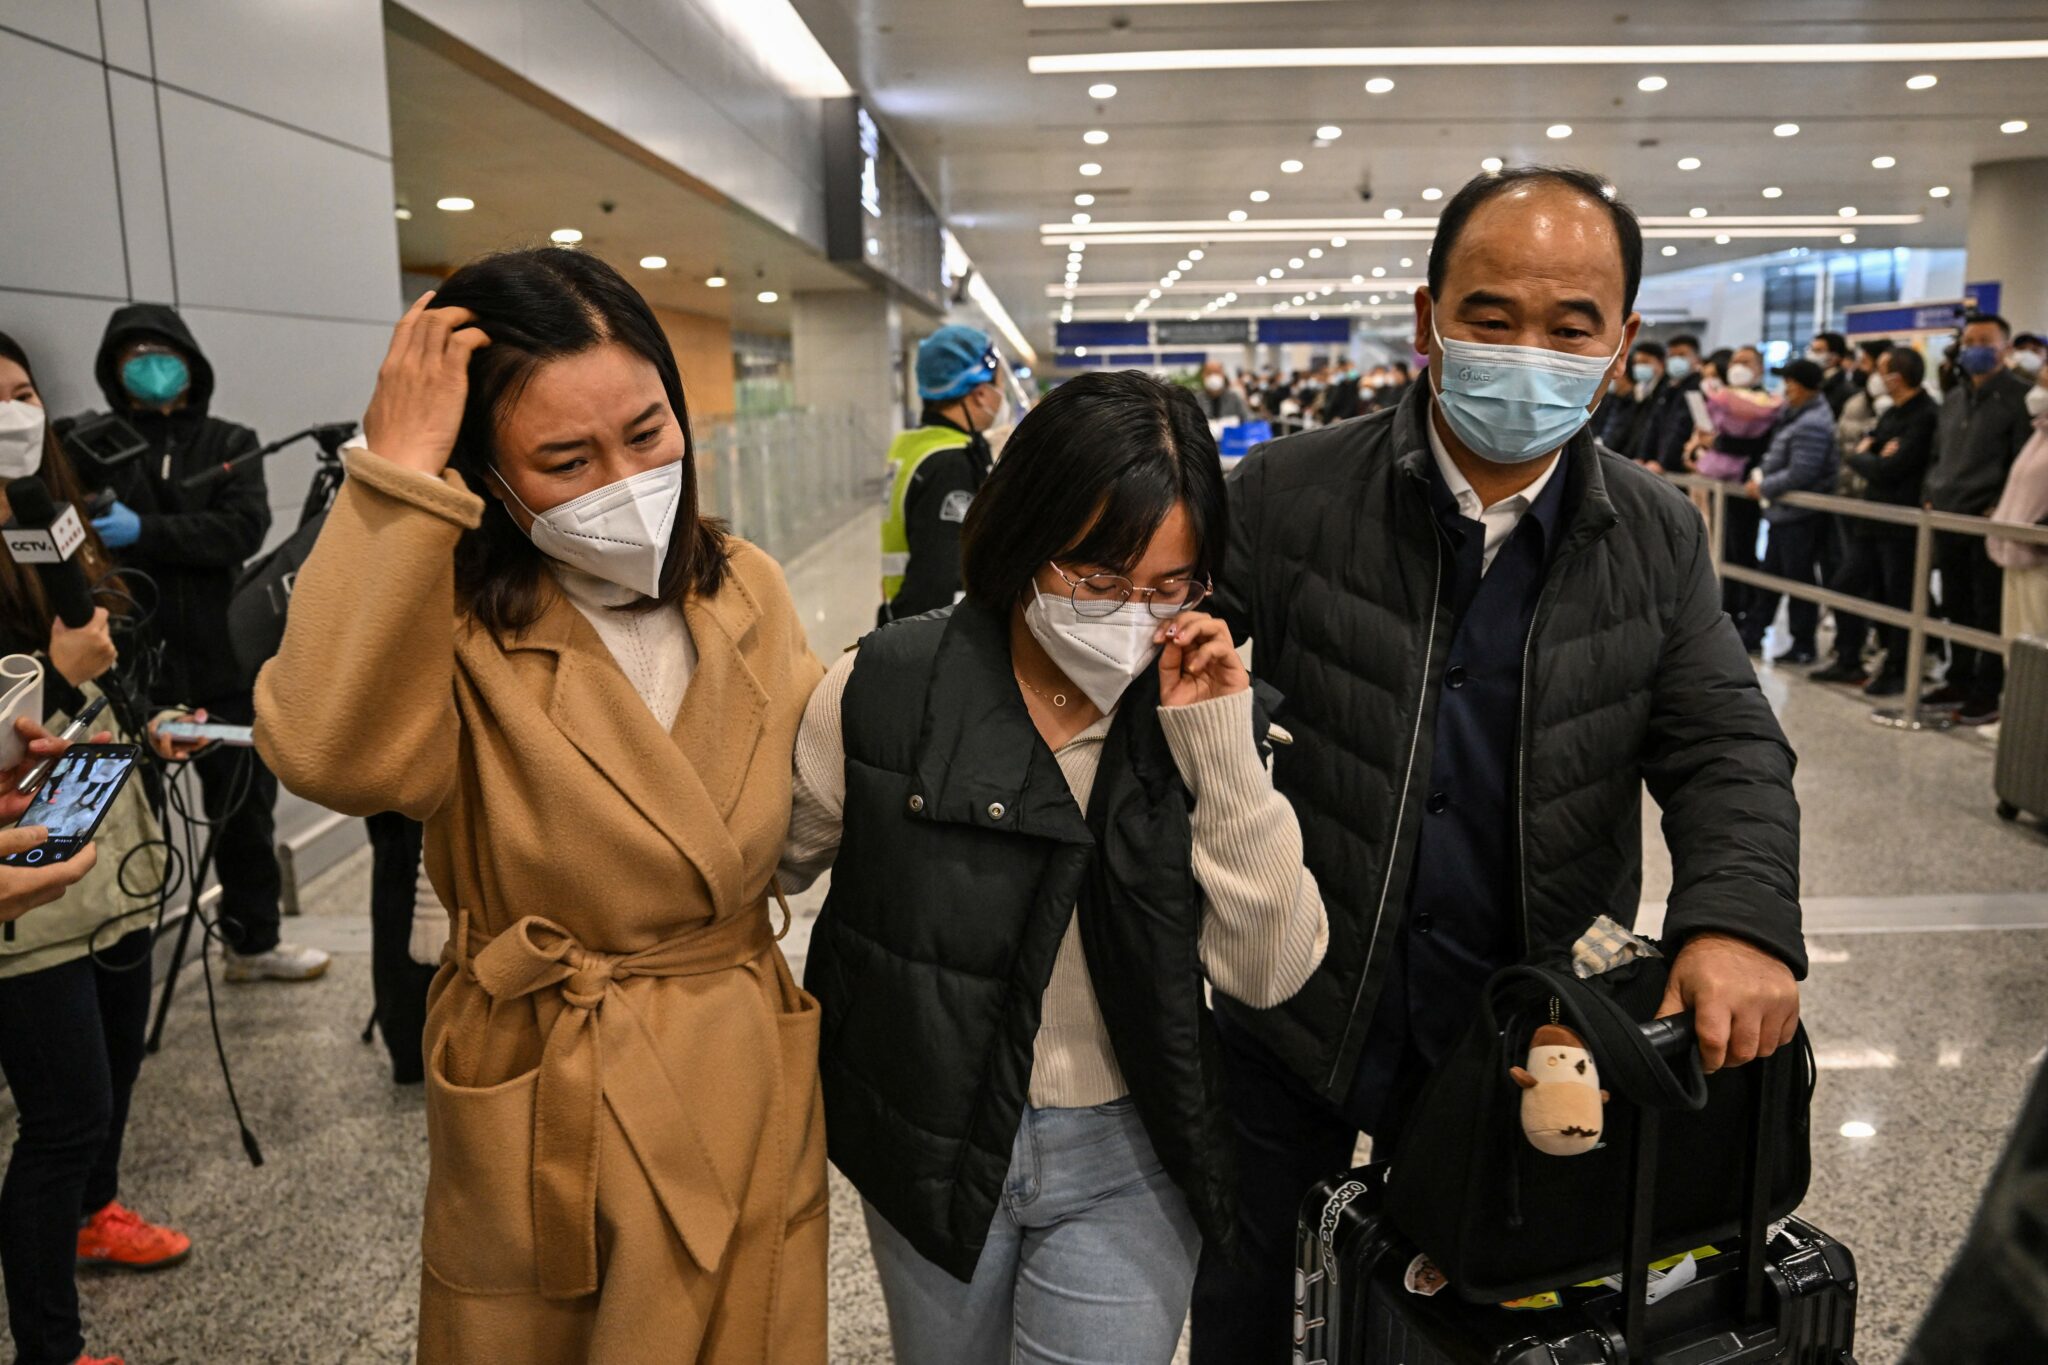 A passenger (C) receives a hug while leaving the arrival area of international flights at the Shanghai Pudong International Airport, in Shanghai on January 8, 2023. - China lifted quarantine requirements for inbound travellers on January 8, ending almost three years of self-imposed isolation even as the country battles a surge in Covid cases. (Photo by Hector RETAMAL / AFP) (Photo by HECTOR RETAMAL/AFP via Getty Images)